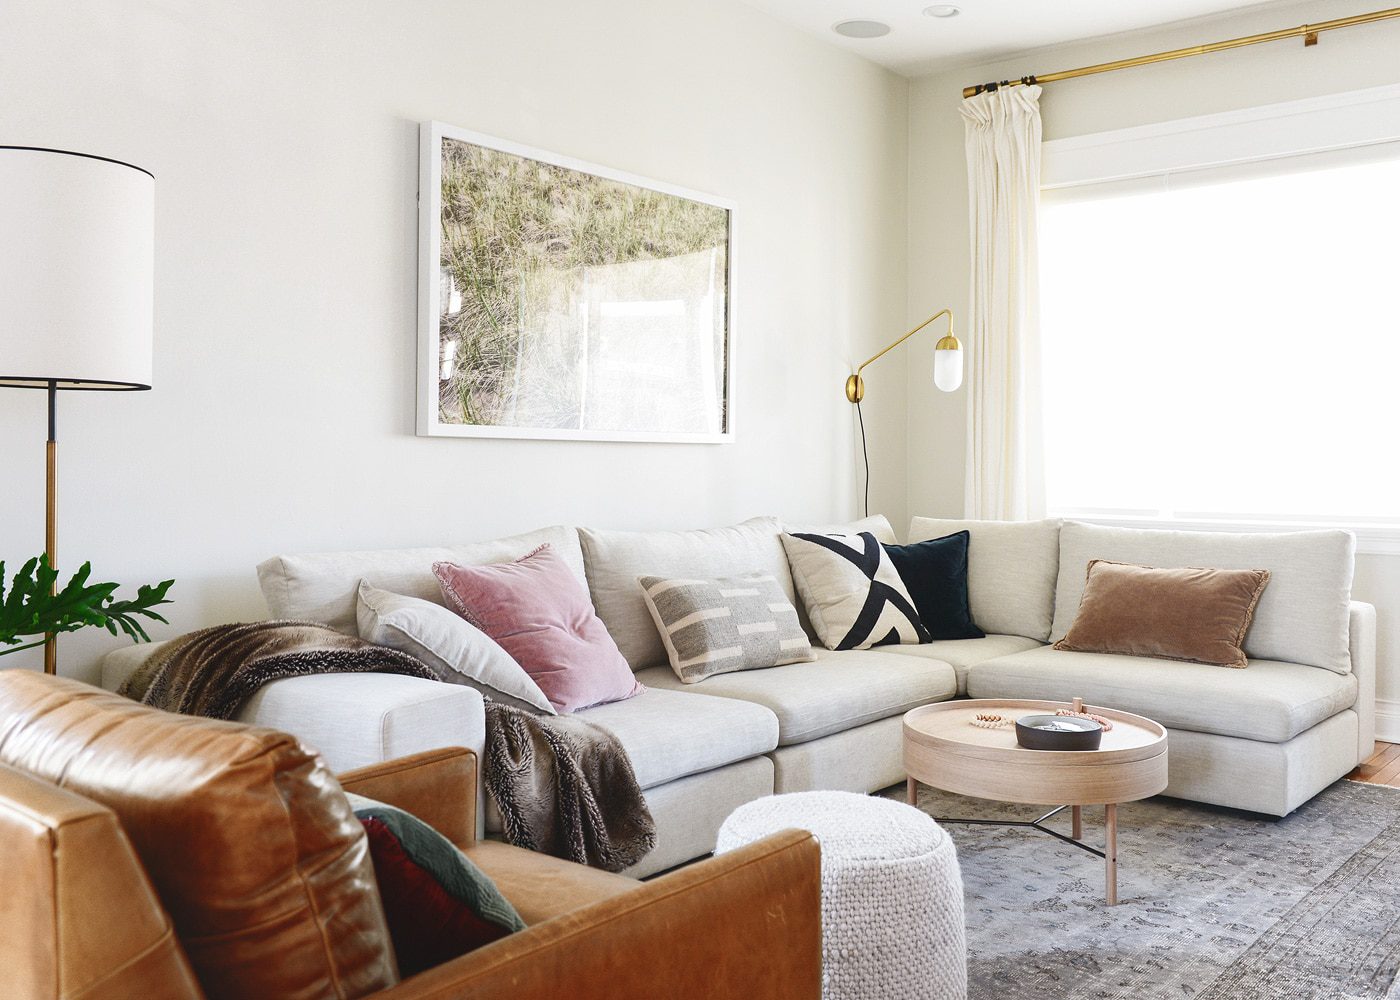 Article Gaba sectional in Pearl White, a living room makeover (or a makeunder?!) // neutral, cozy living room via Yellow Brick Home